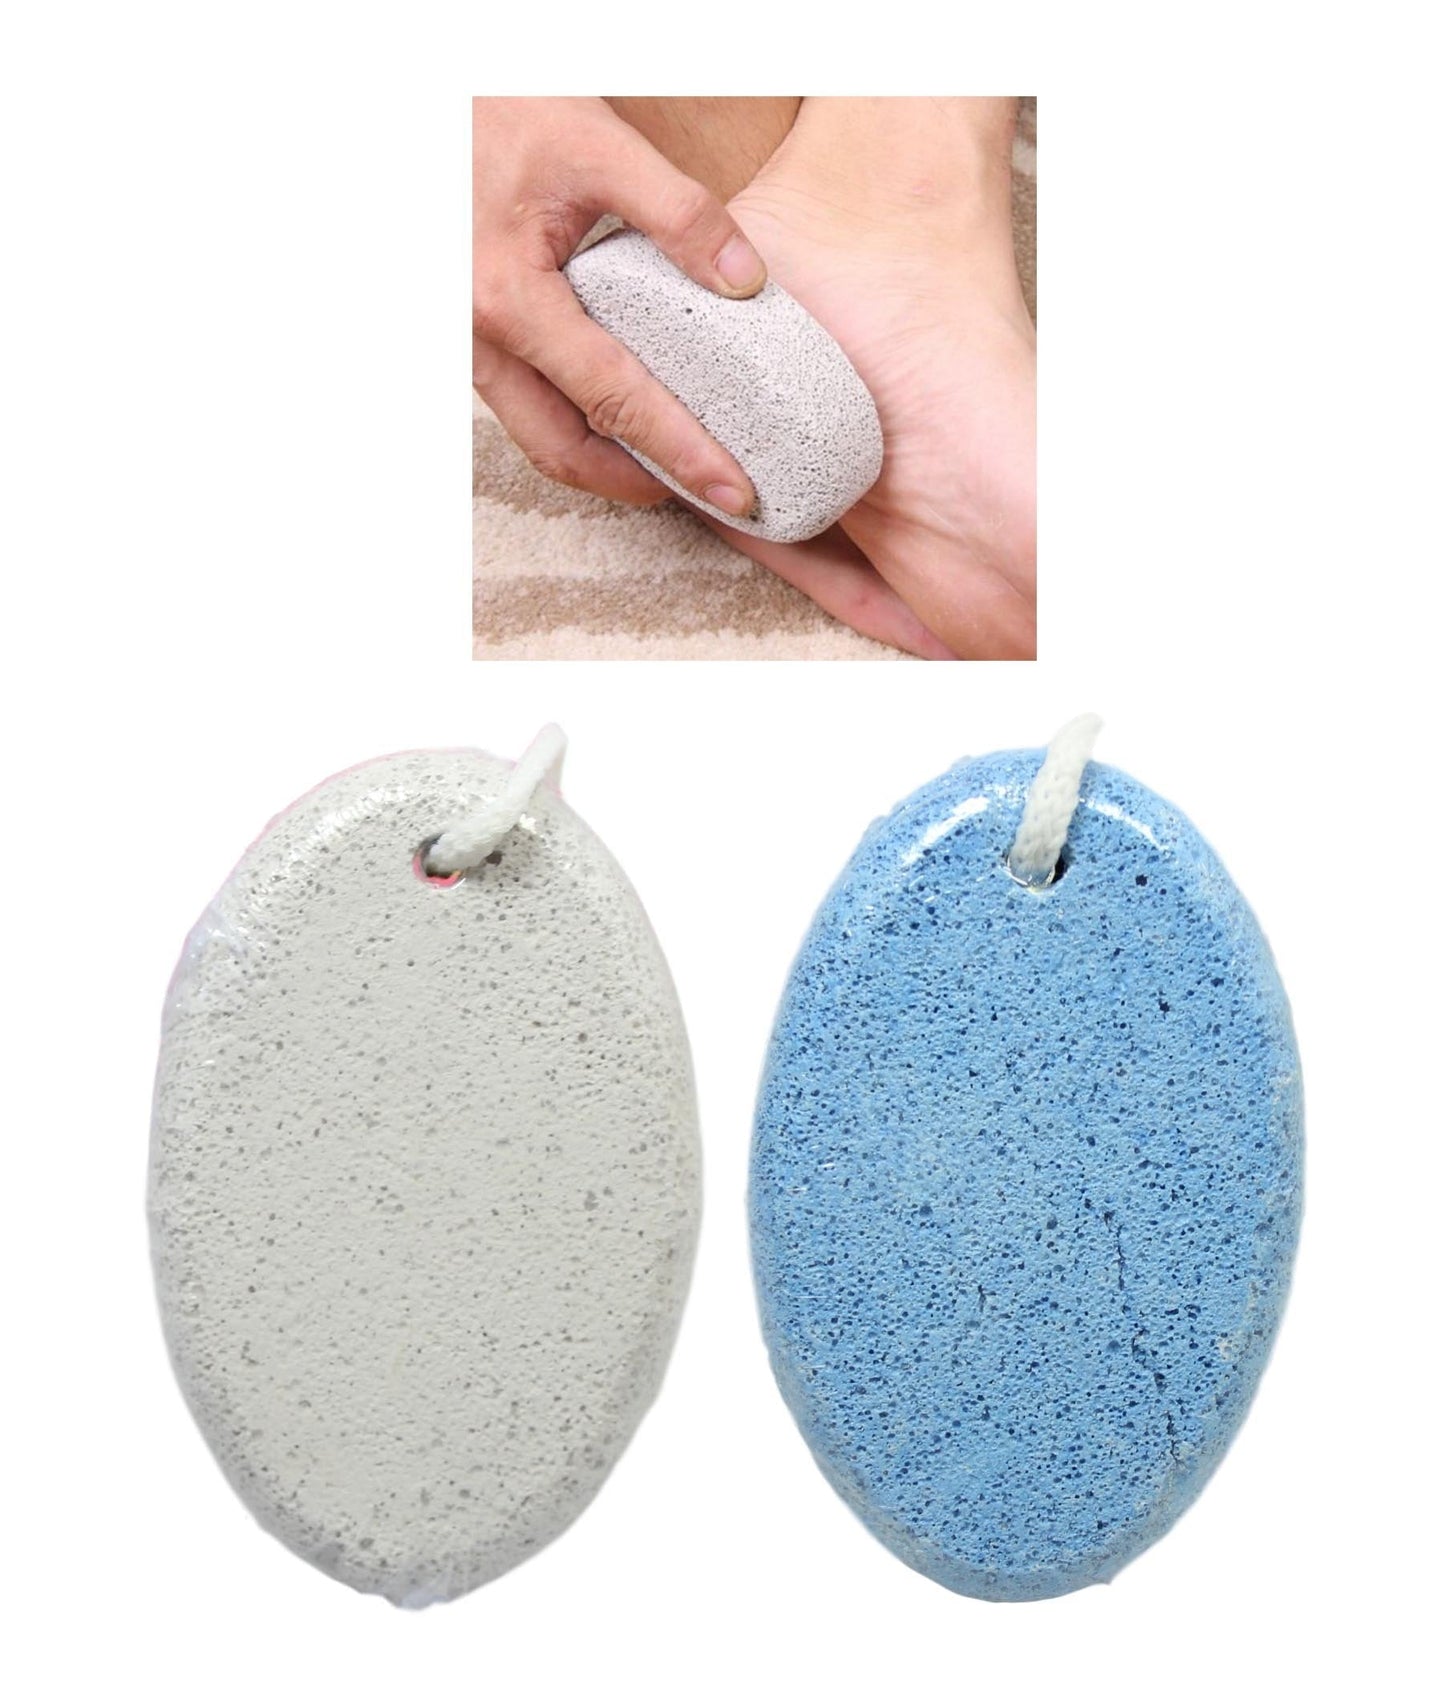 Pumice Stone Health Foot Care Remove Dead Skin Make Foot Skin Natural 11cm 5228 (Parcel Rate)